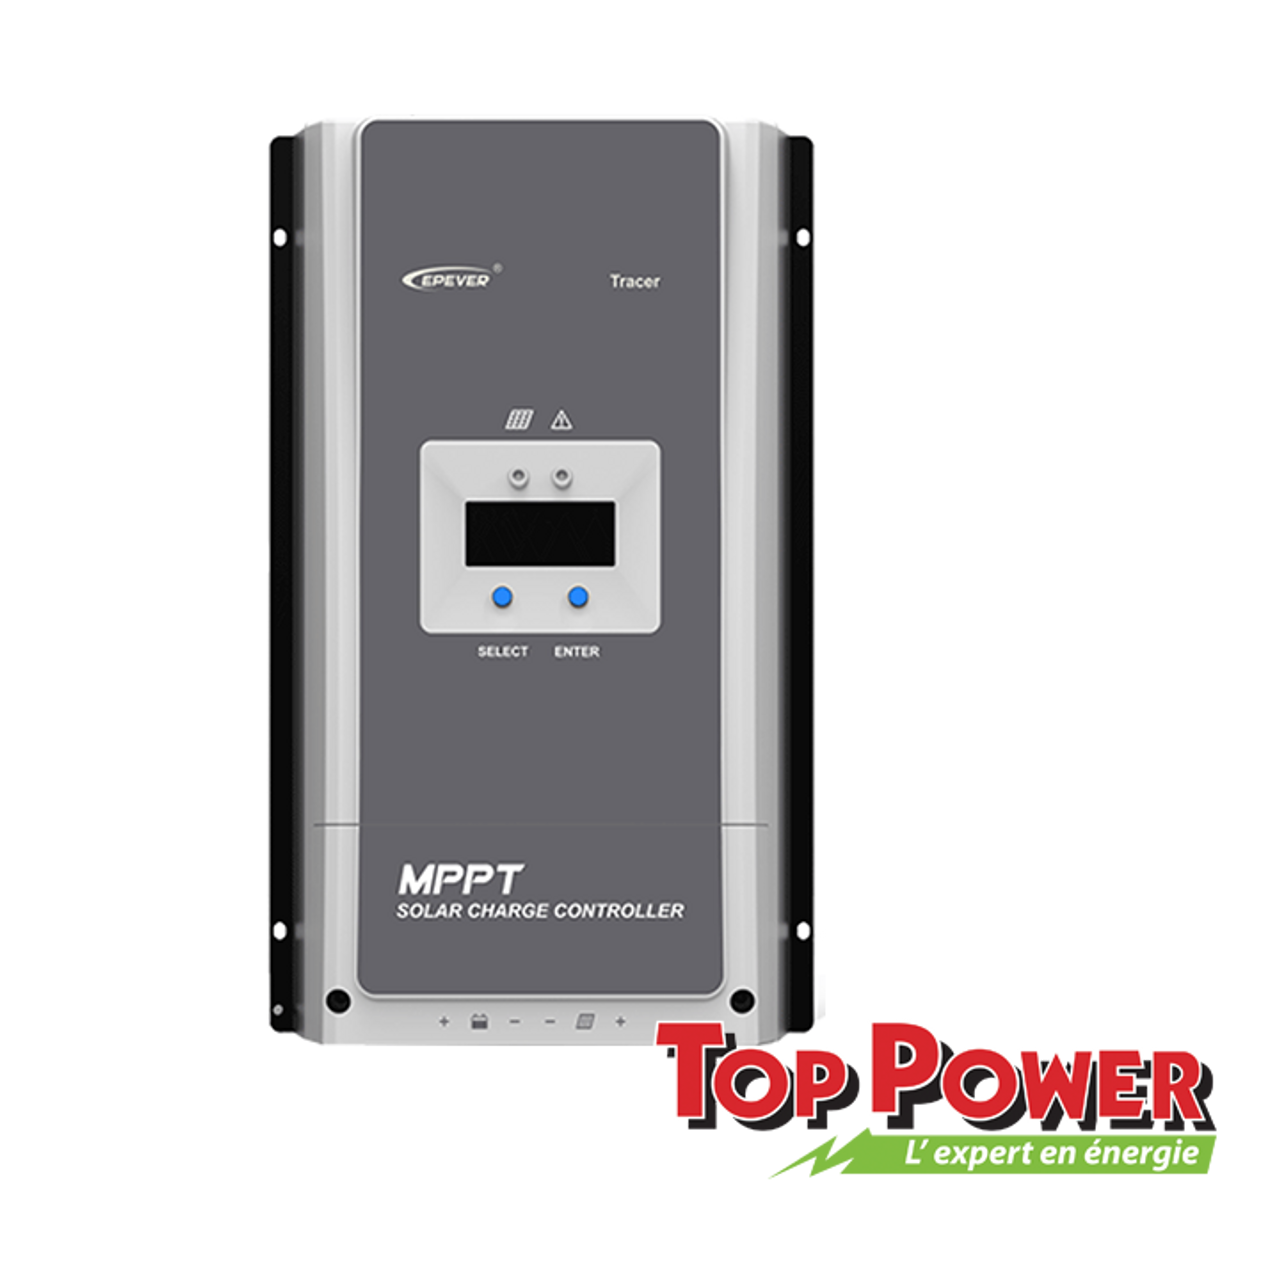 MPPT 100A 12/24/48Vdc - 150Voc Charge Controller - EPEVER - Top Power Store